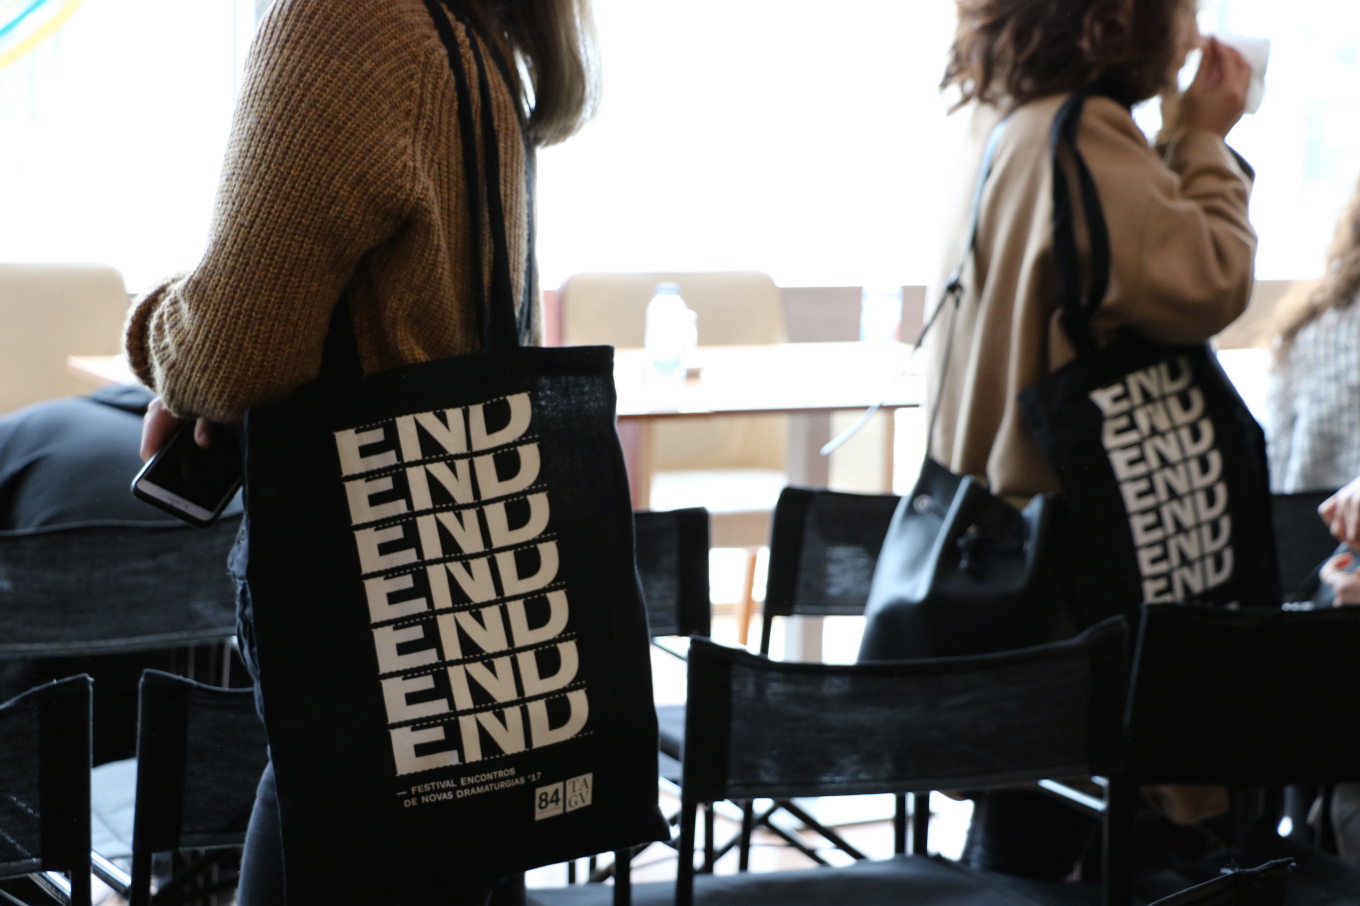 Tote bags from END Festival